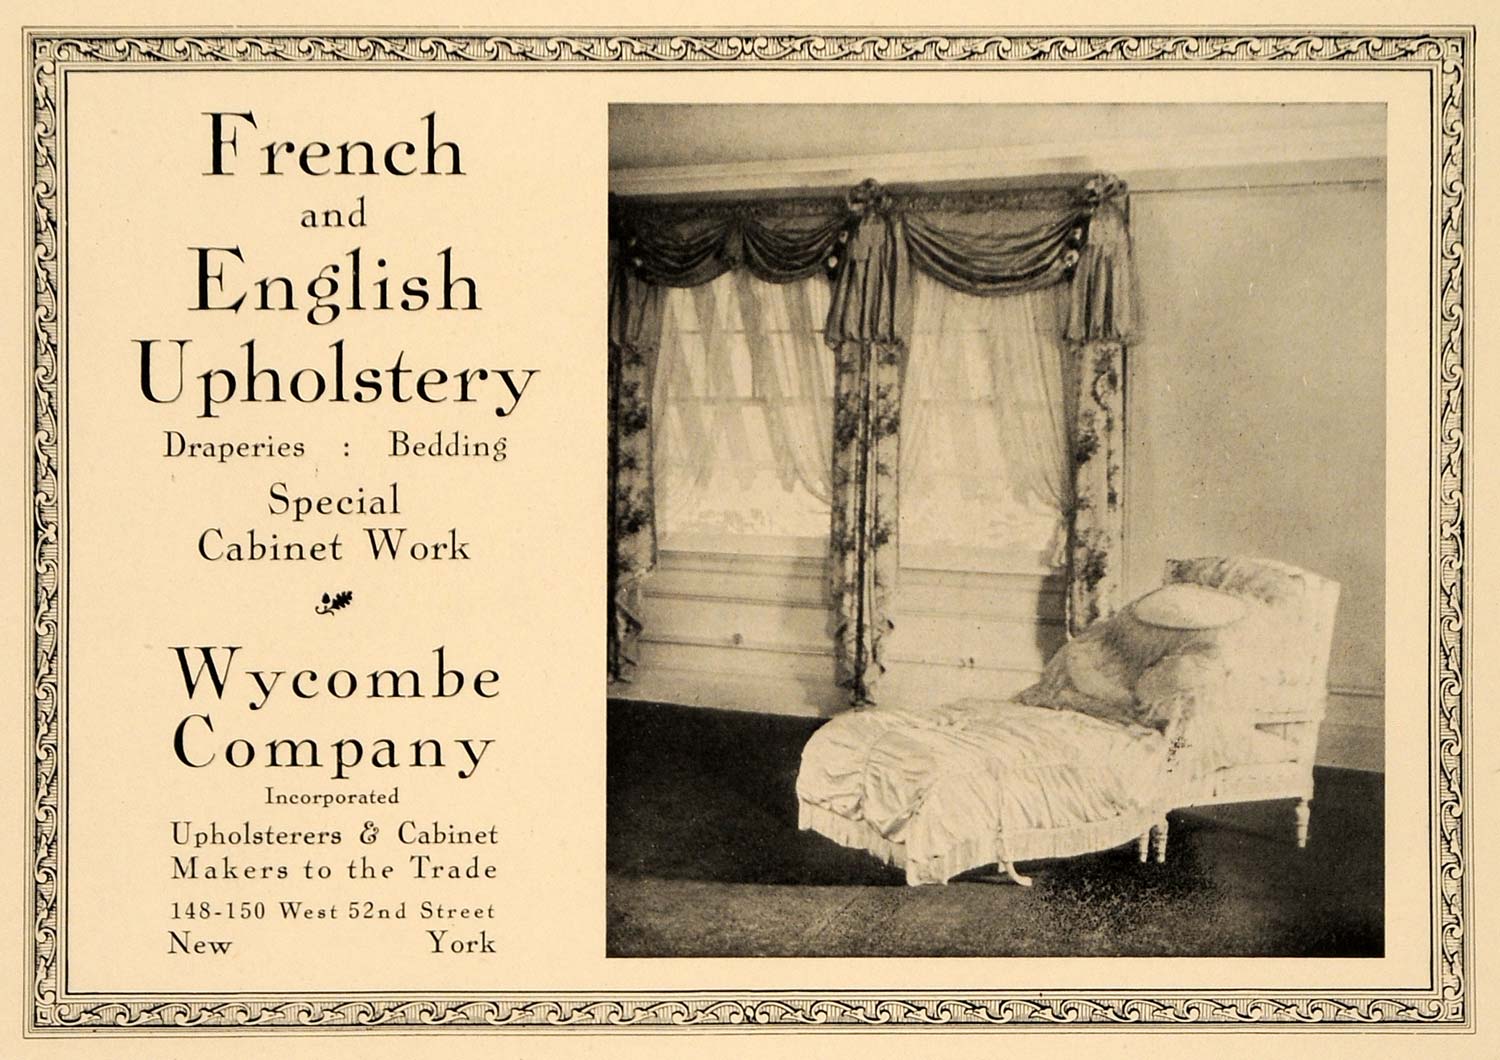 1918 Ad Wycombe French Eng. Upholstery Drapery Bedding - ORIGINAL GF2